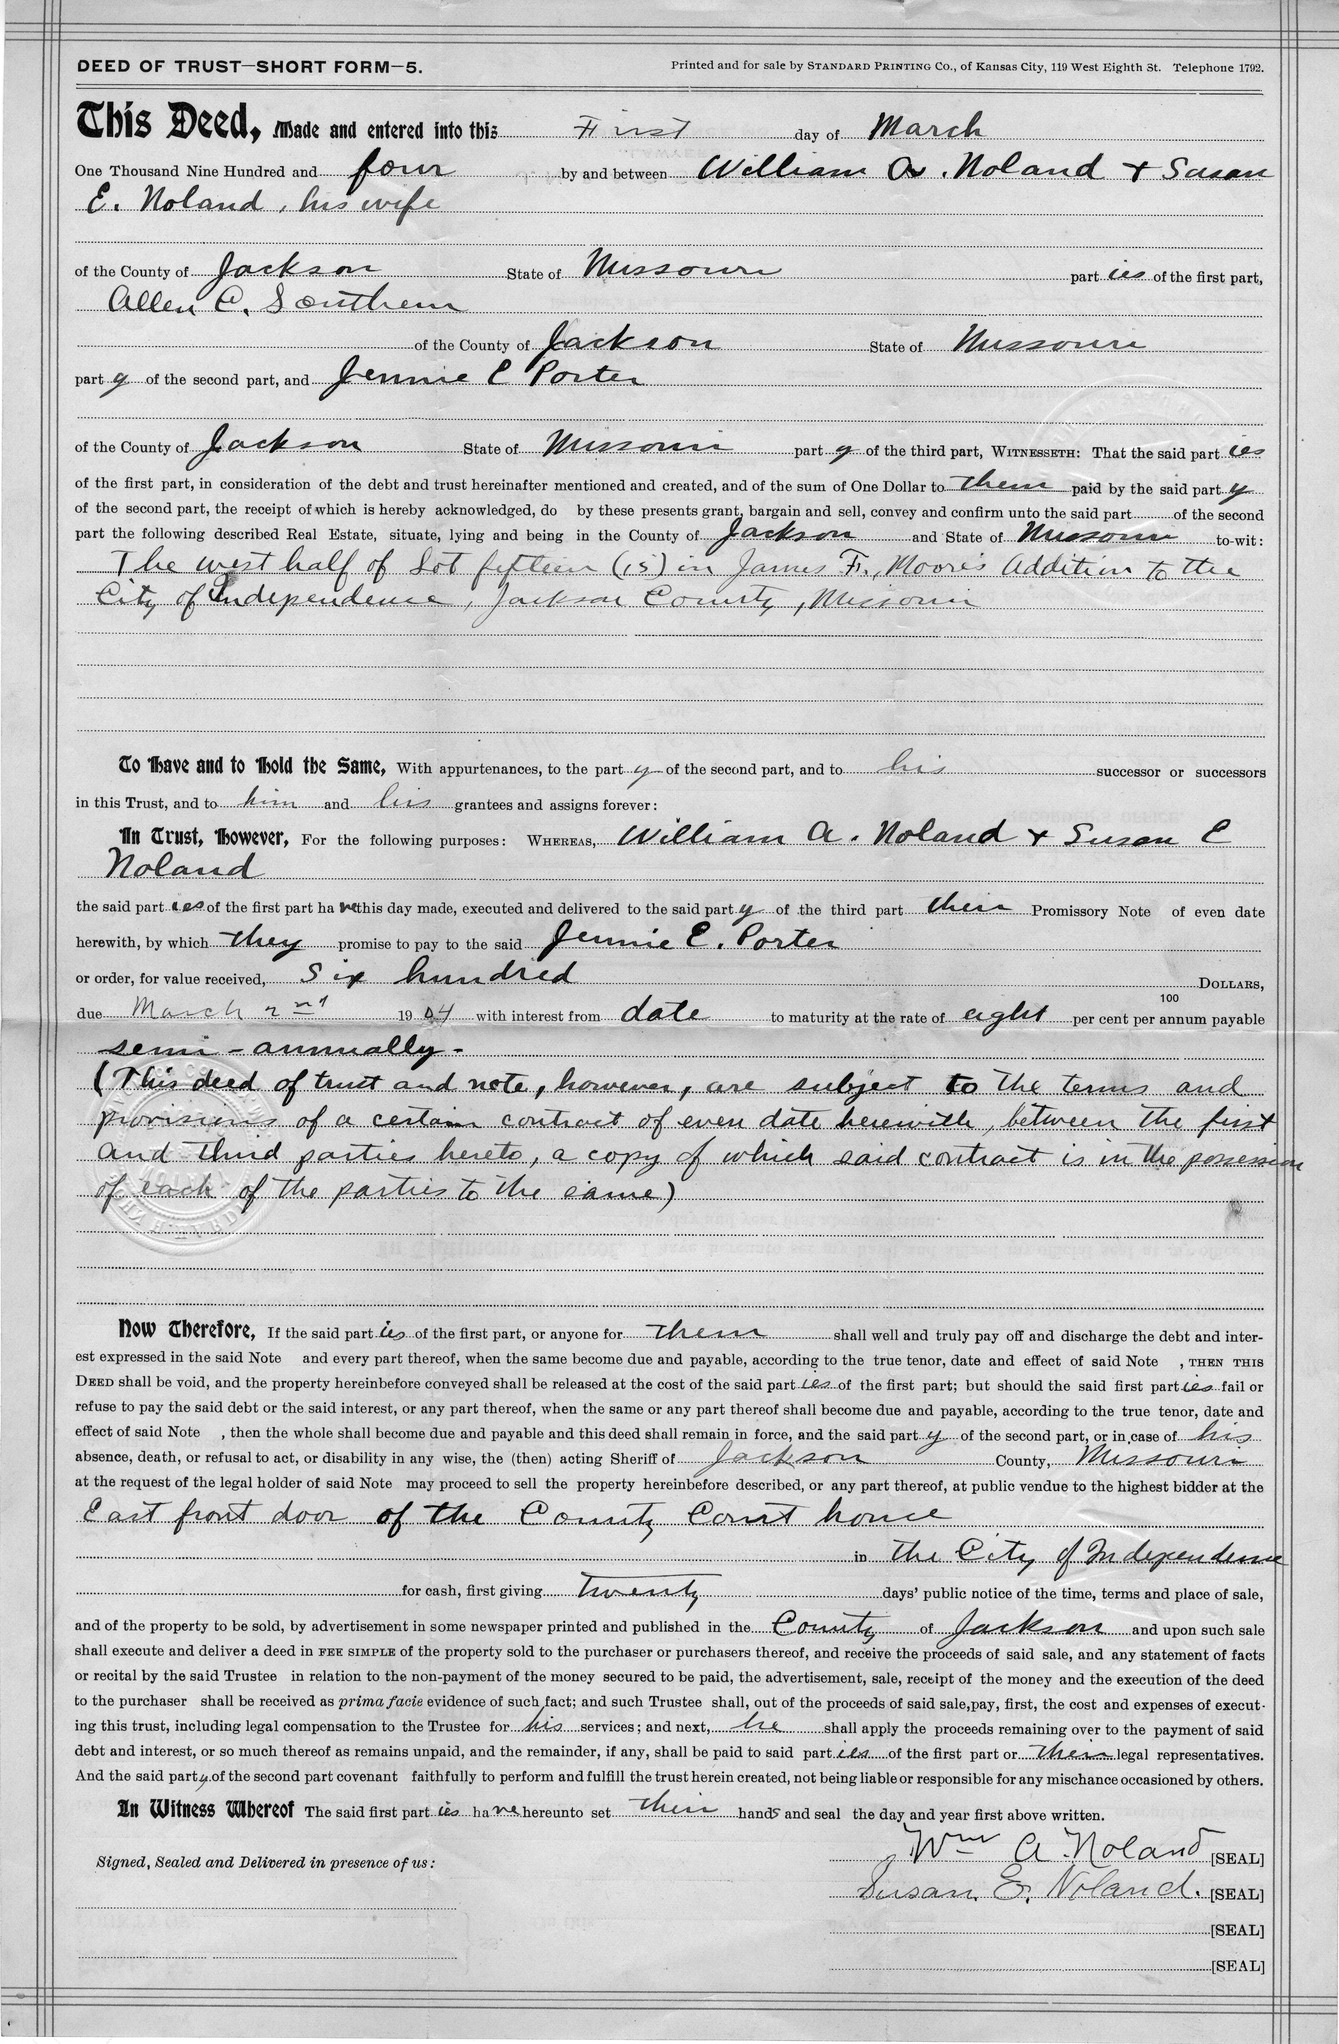 Deed of Trust from William A. Noland and Susan E. Noland to Allen C. Southern for Jennie E. Porter